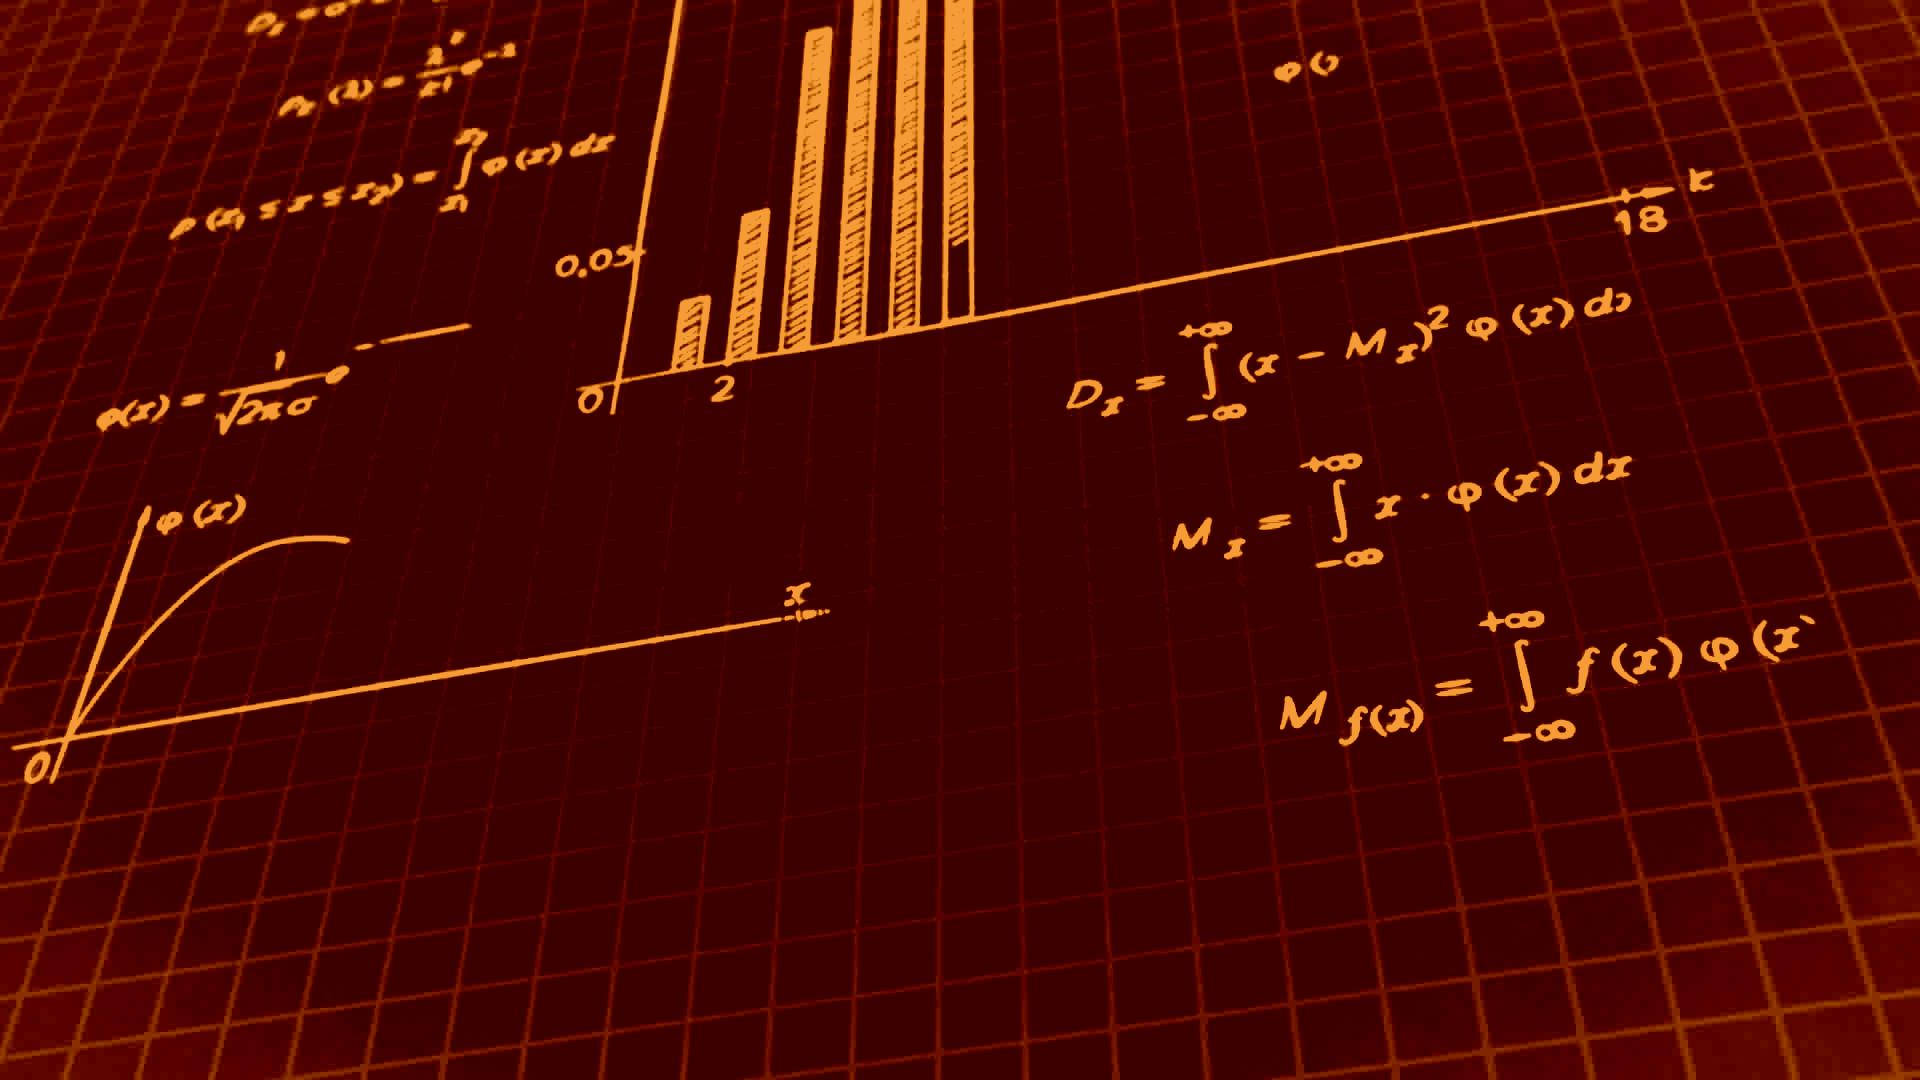 Free Math Wallpaper Downloads, [200+] Math Wallpapers for FREE |  